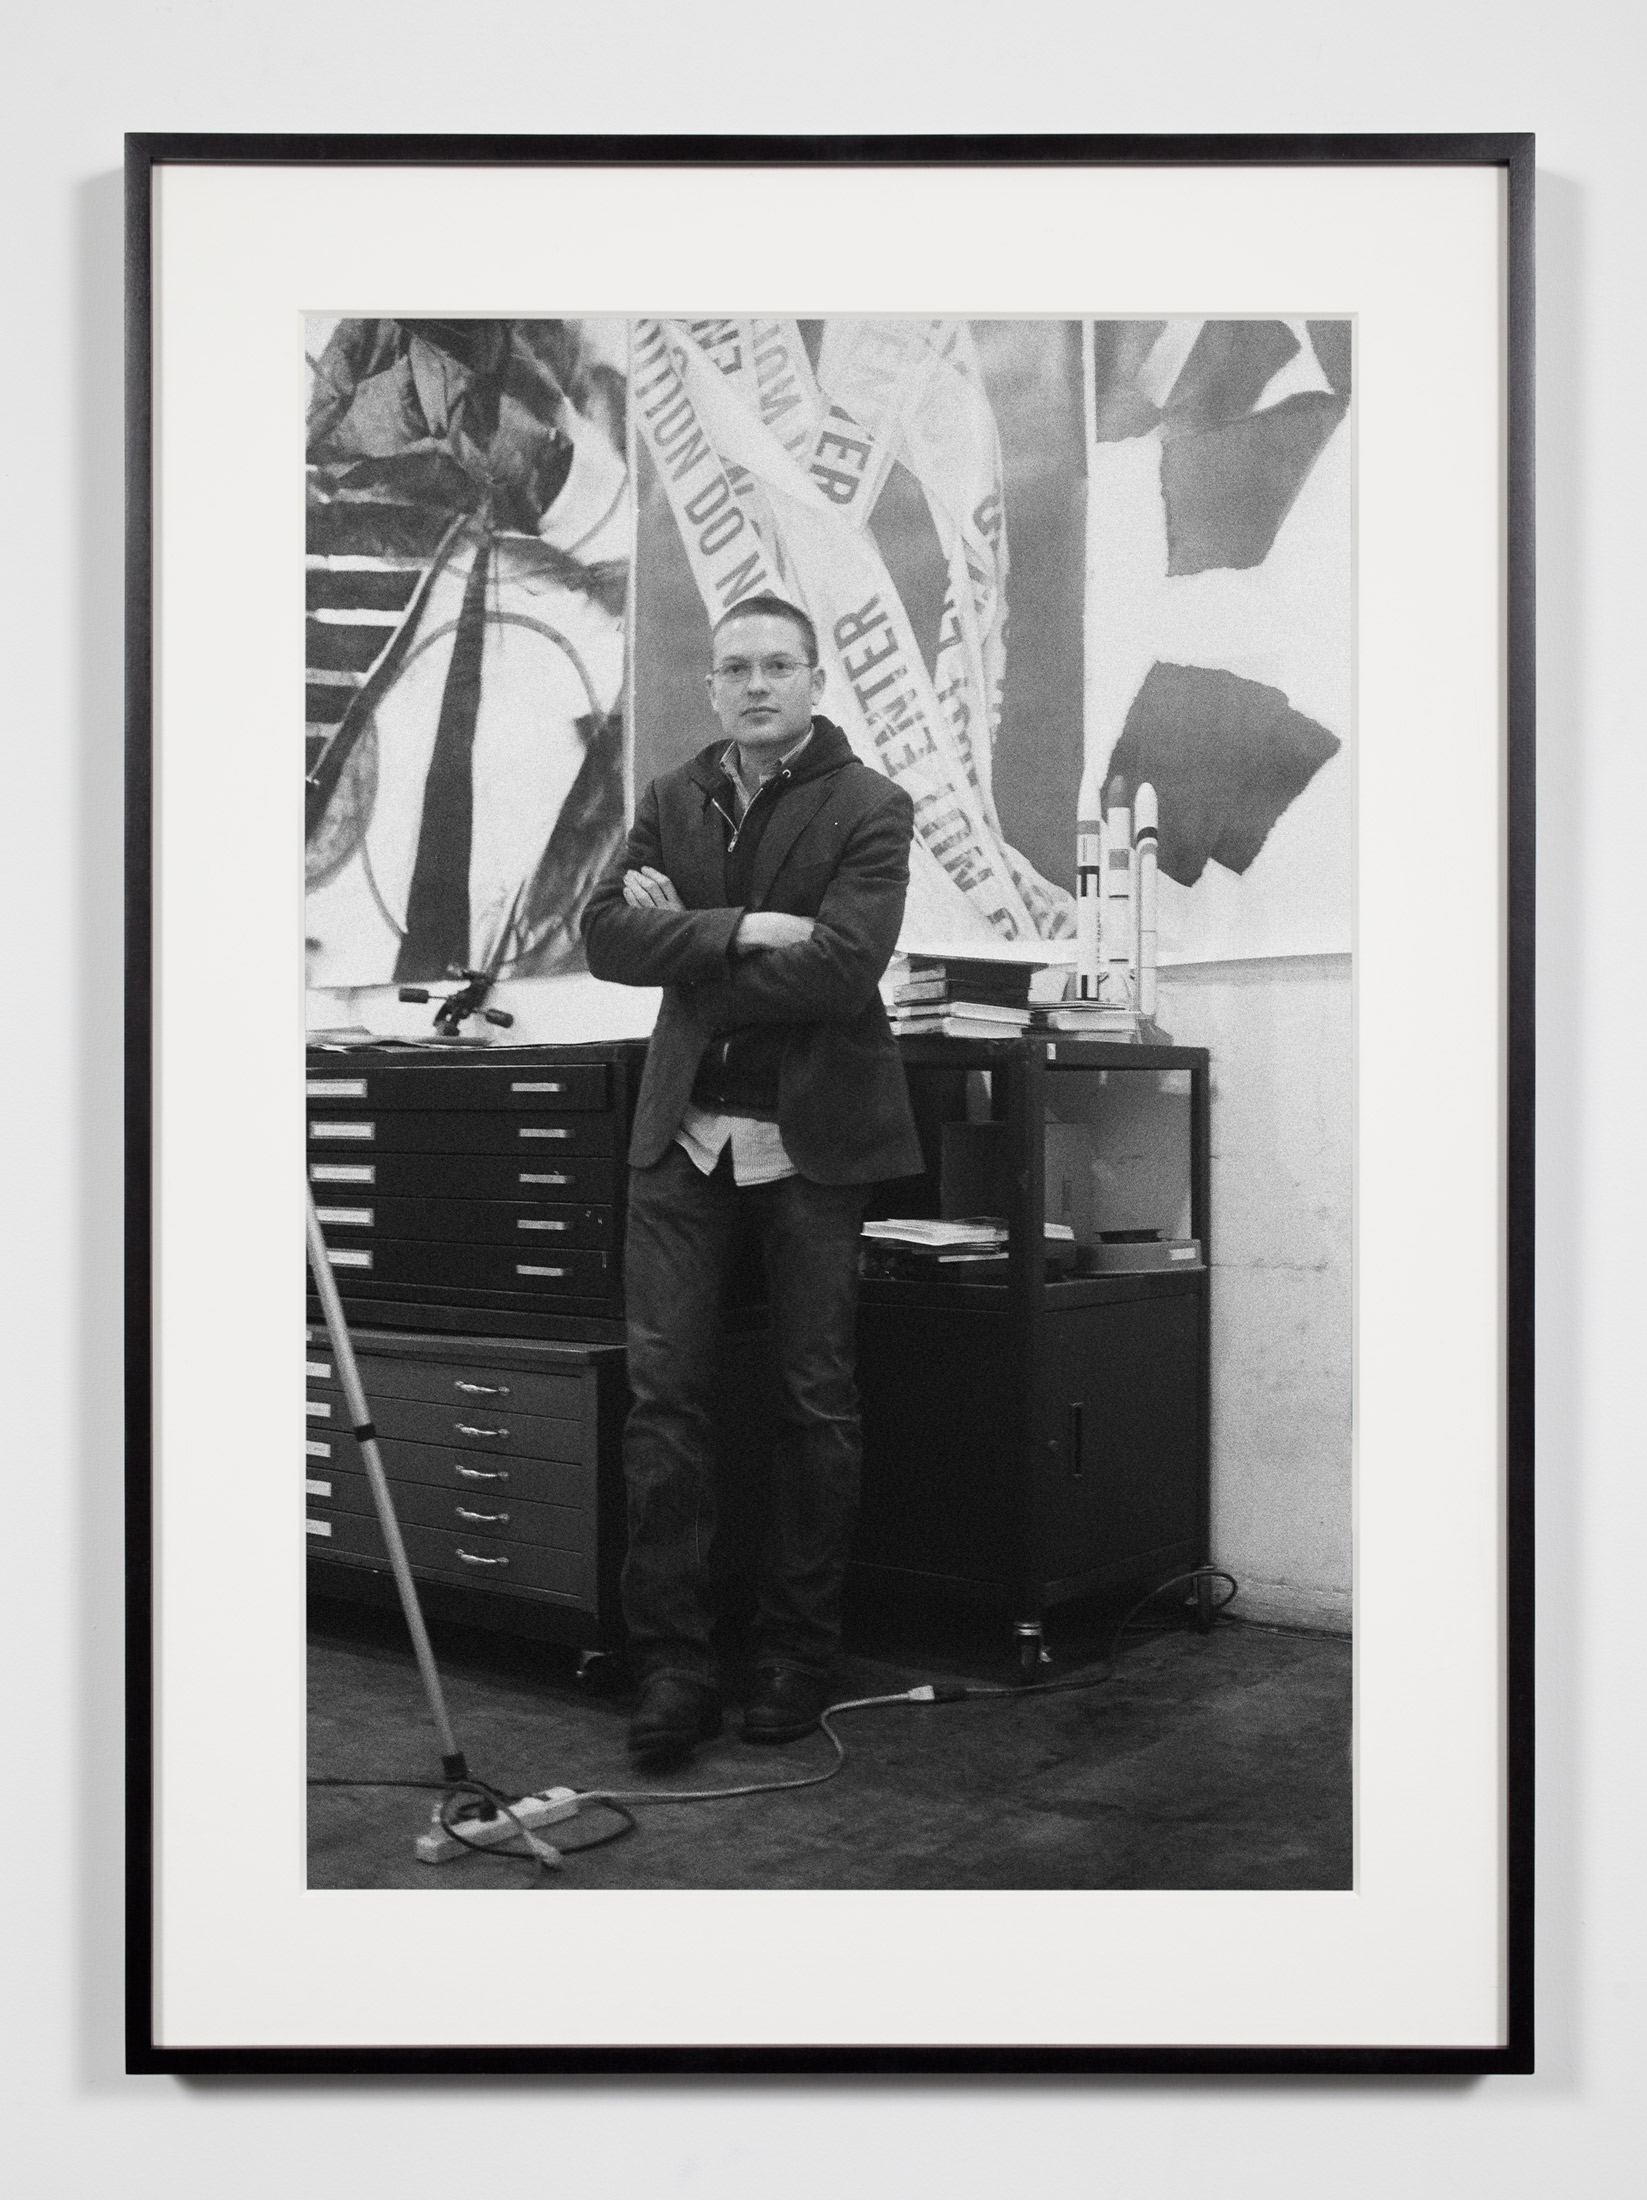   Artist, Los Angeles, California, February 8, 2009   2011  Epson Ultrachrome K3 archival ink jet print on Hahnemühle Photo Rag paper  36 3/8 x 26 3/8 inches   Industrial Portraits, 2008–    A Diagram of Forces, 2011     